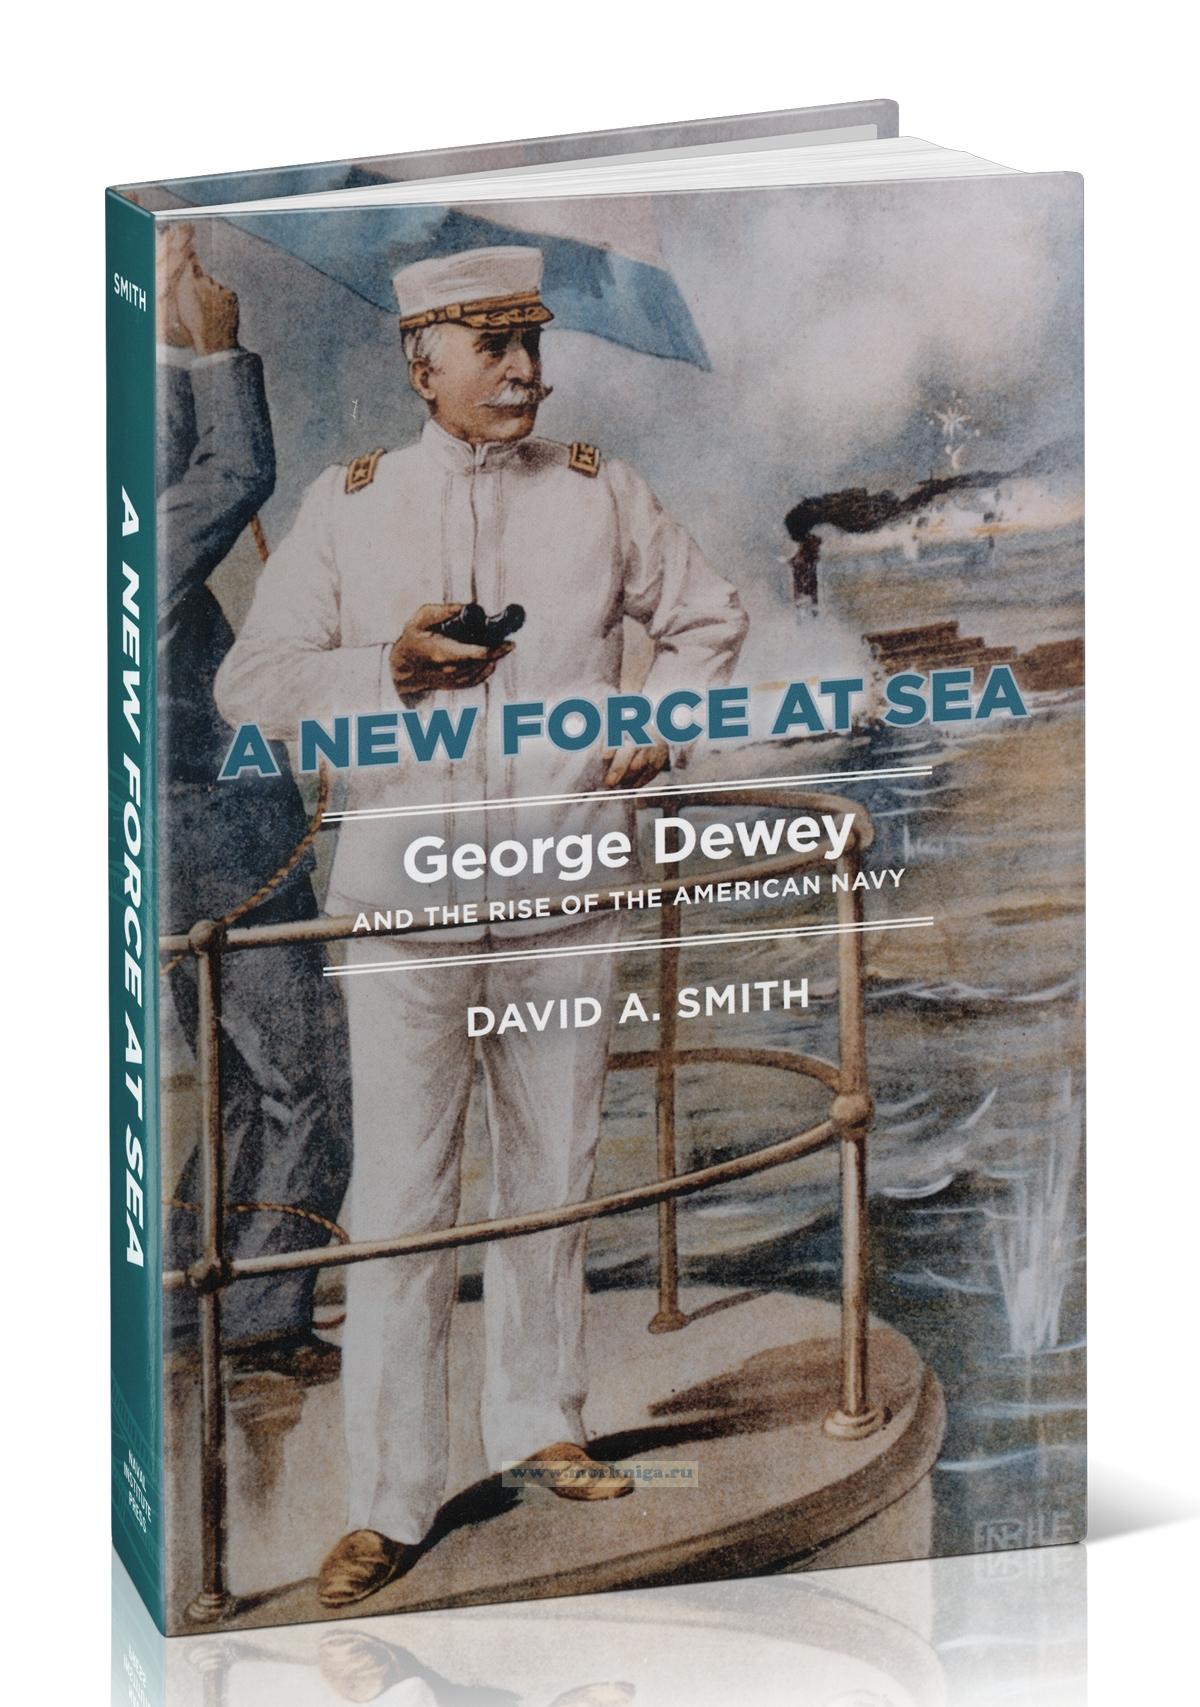 A New Force at Sea. George Dewey and the Rise of the American Navy